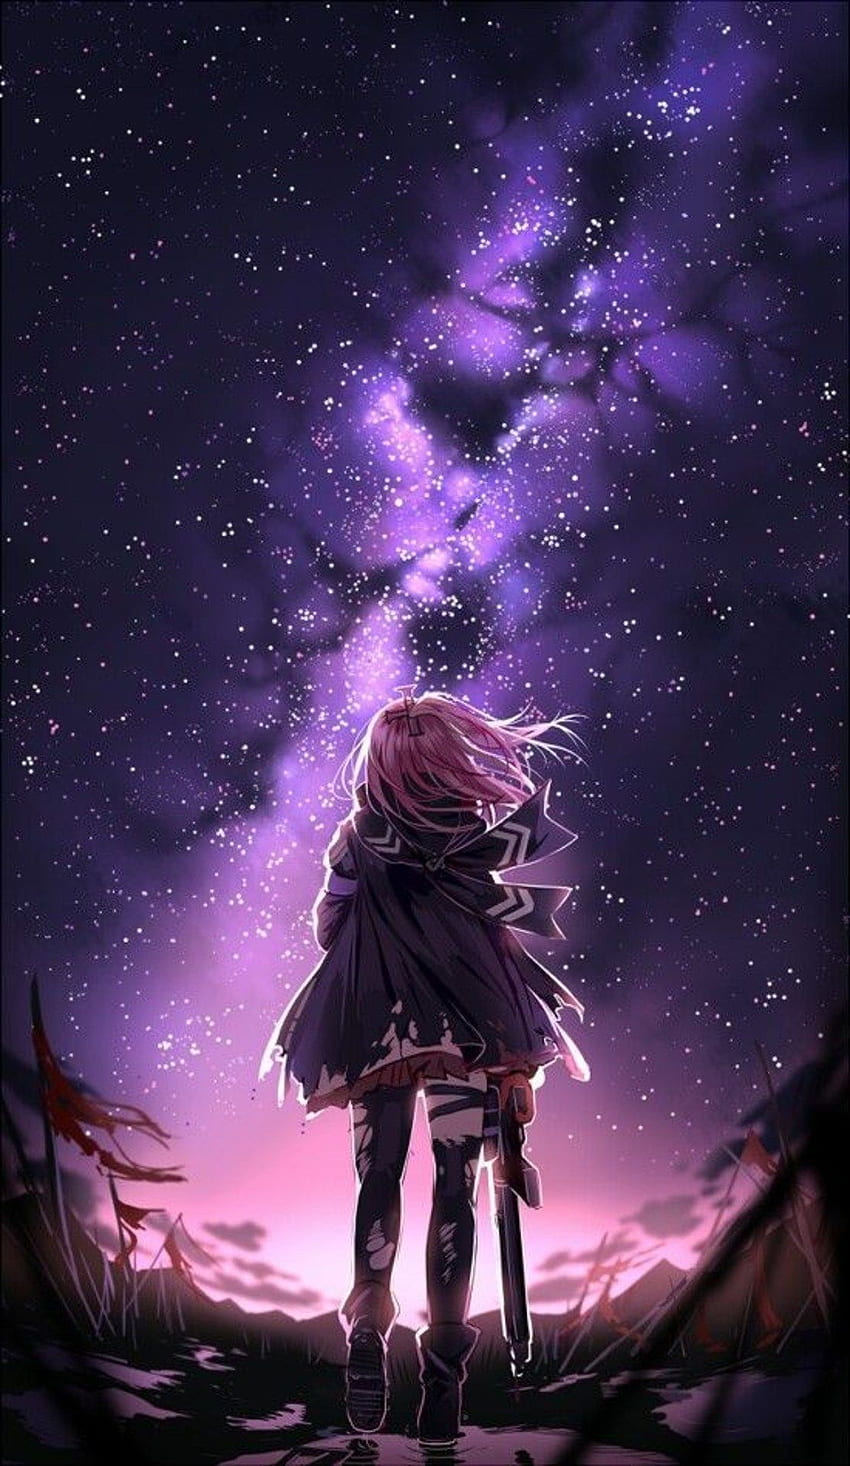 100+] Purple Aesthetic Anime Wallpapers | Wallpapers.com